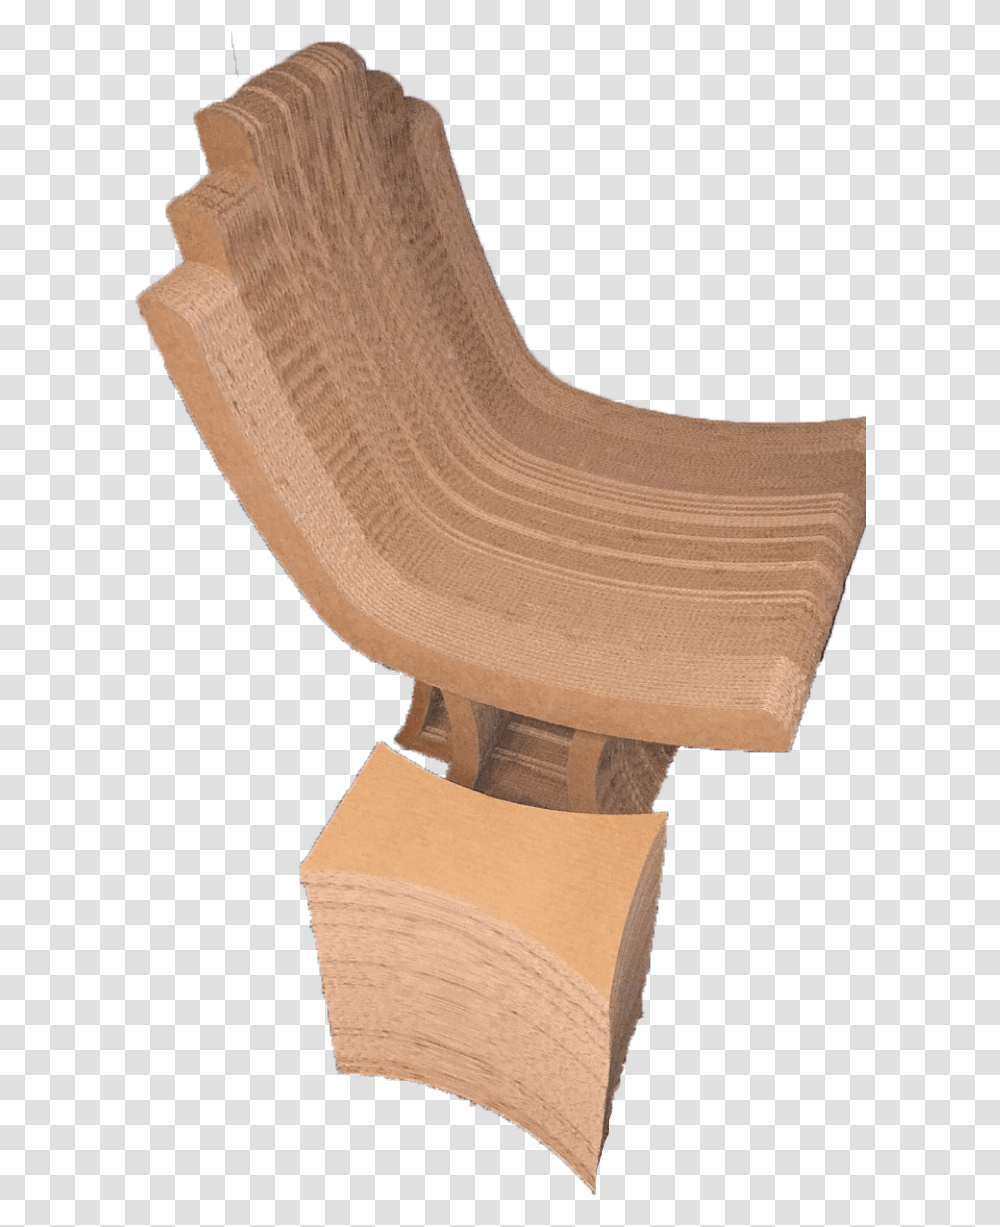 Bouquet Was Made For Sister S Wedding Cardboard Chair, Furniture, Wood, Plywood, Hat Transparent Png